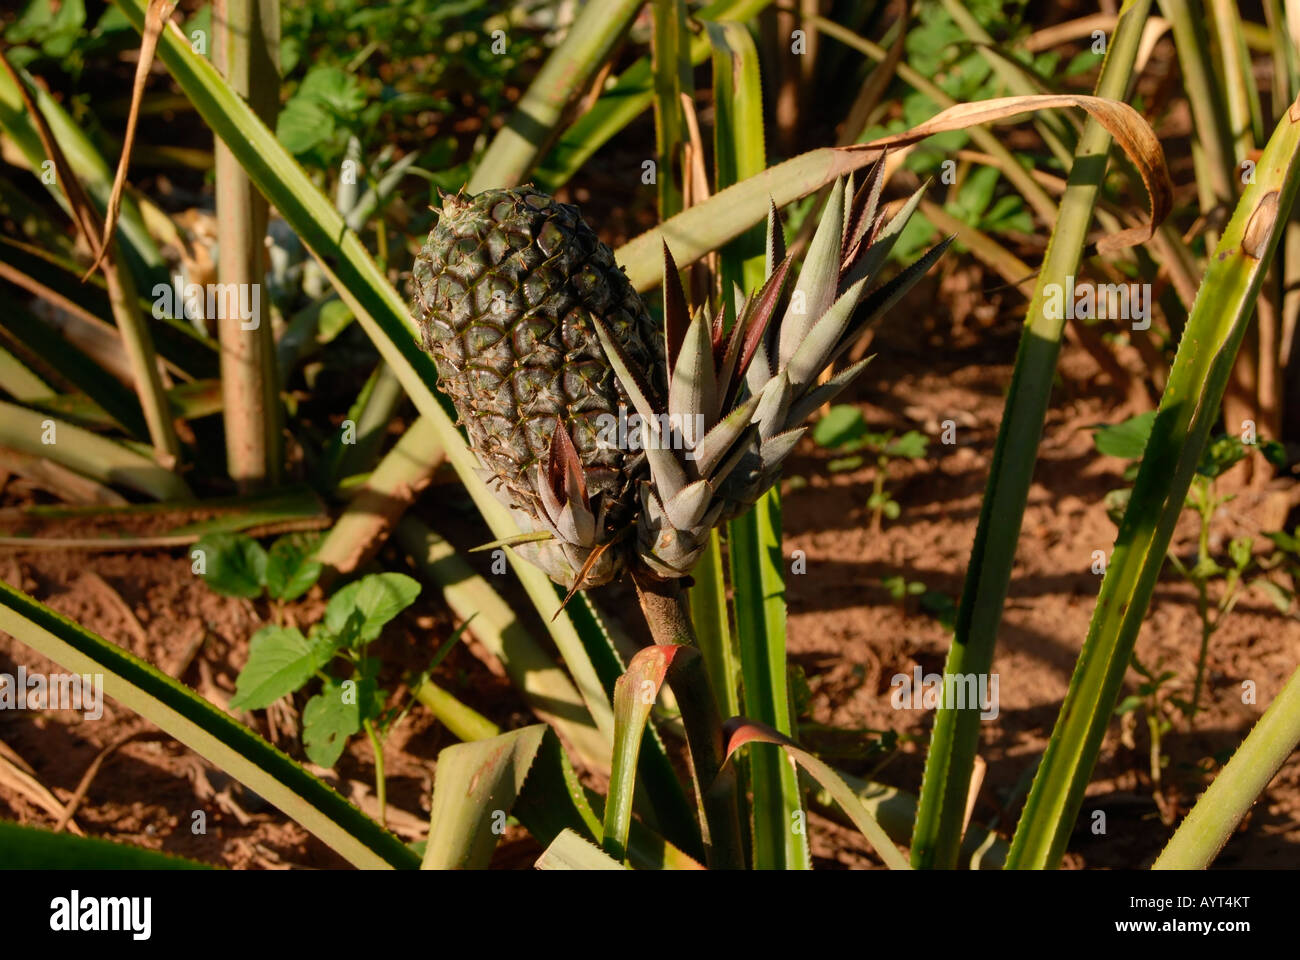 Pineapple (Ananas comosus) growing in a field, San Pedro, Paraguay, South America Stock Photo